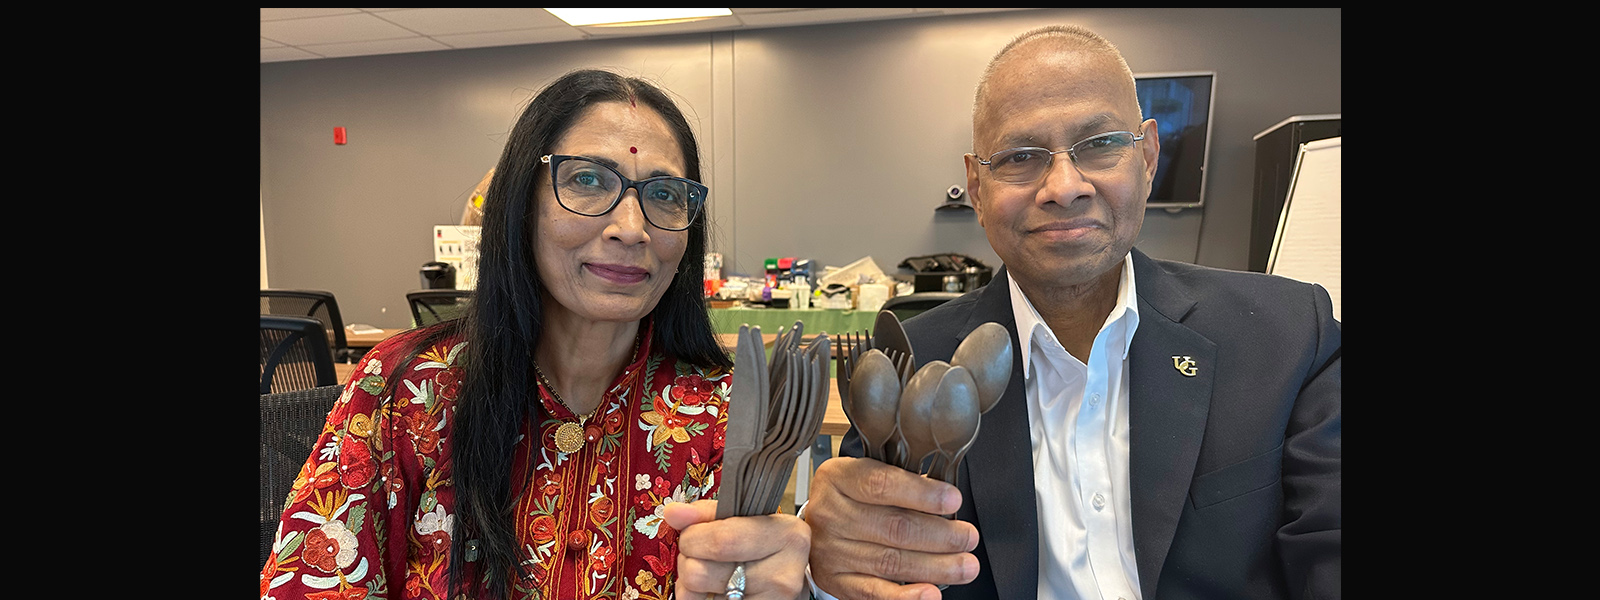 Two people hold up bioplastic cutlery and smile for the camera